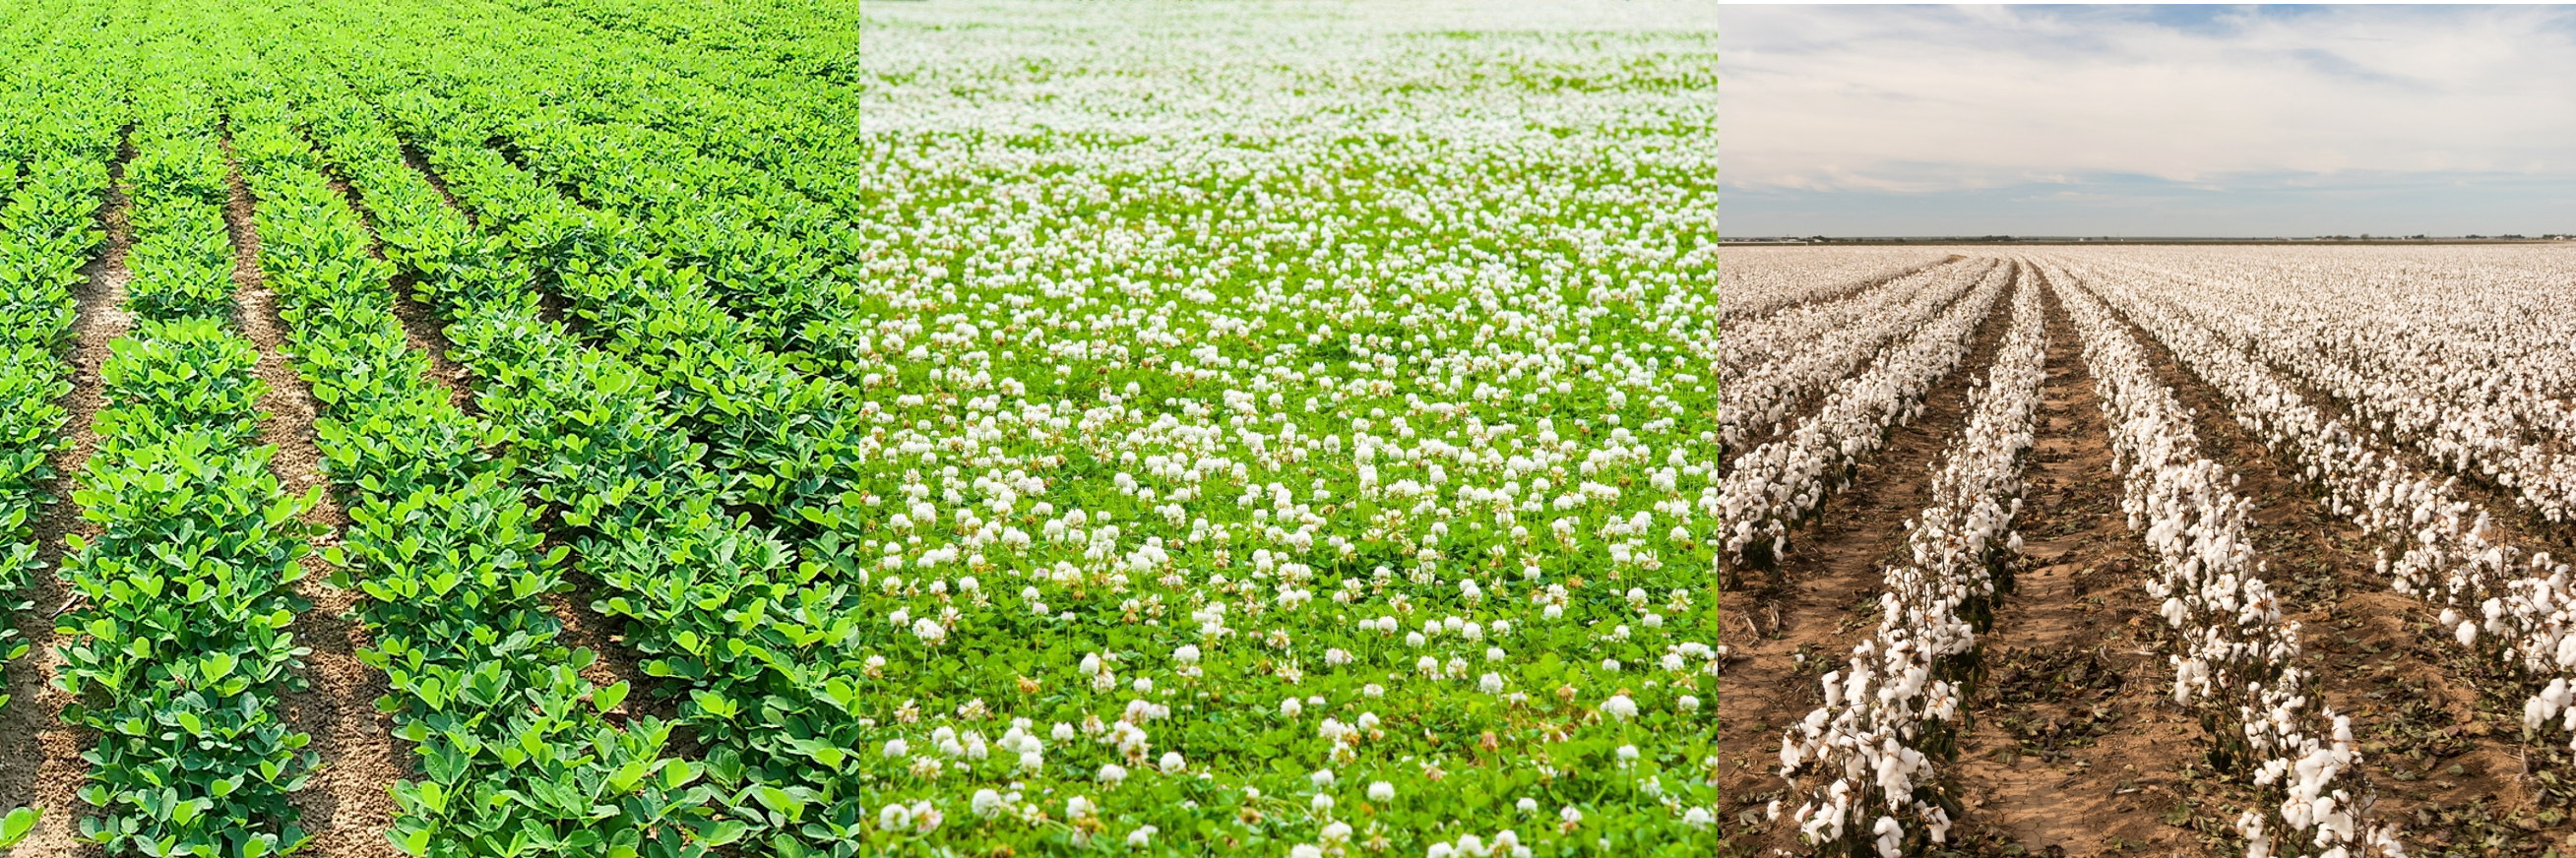 Peanuts, Clover and Cotton growing in fields